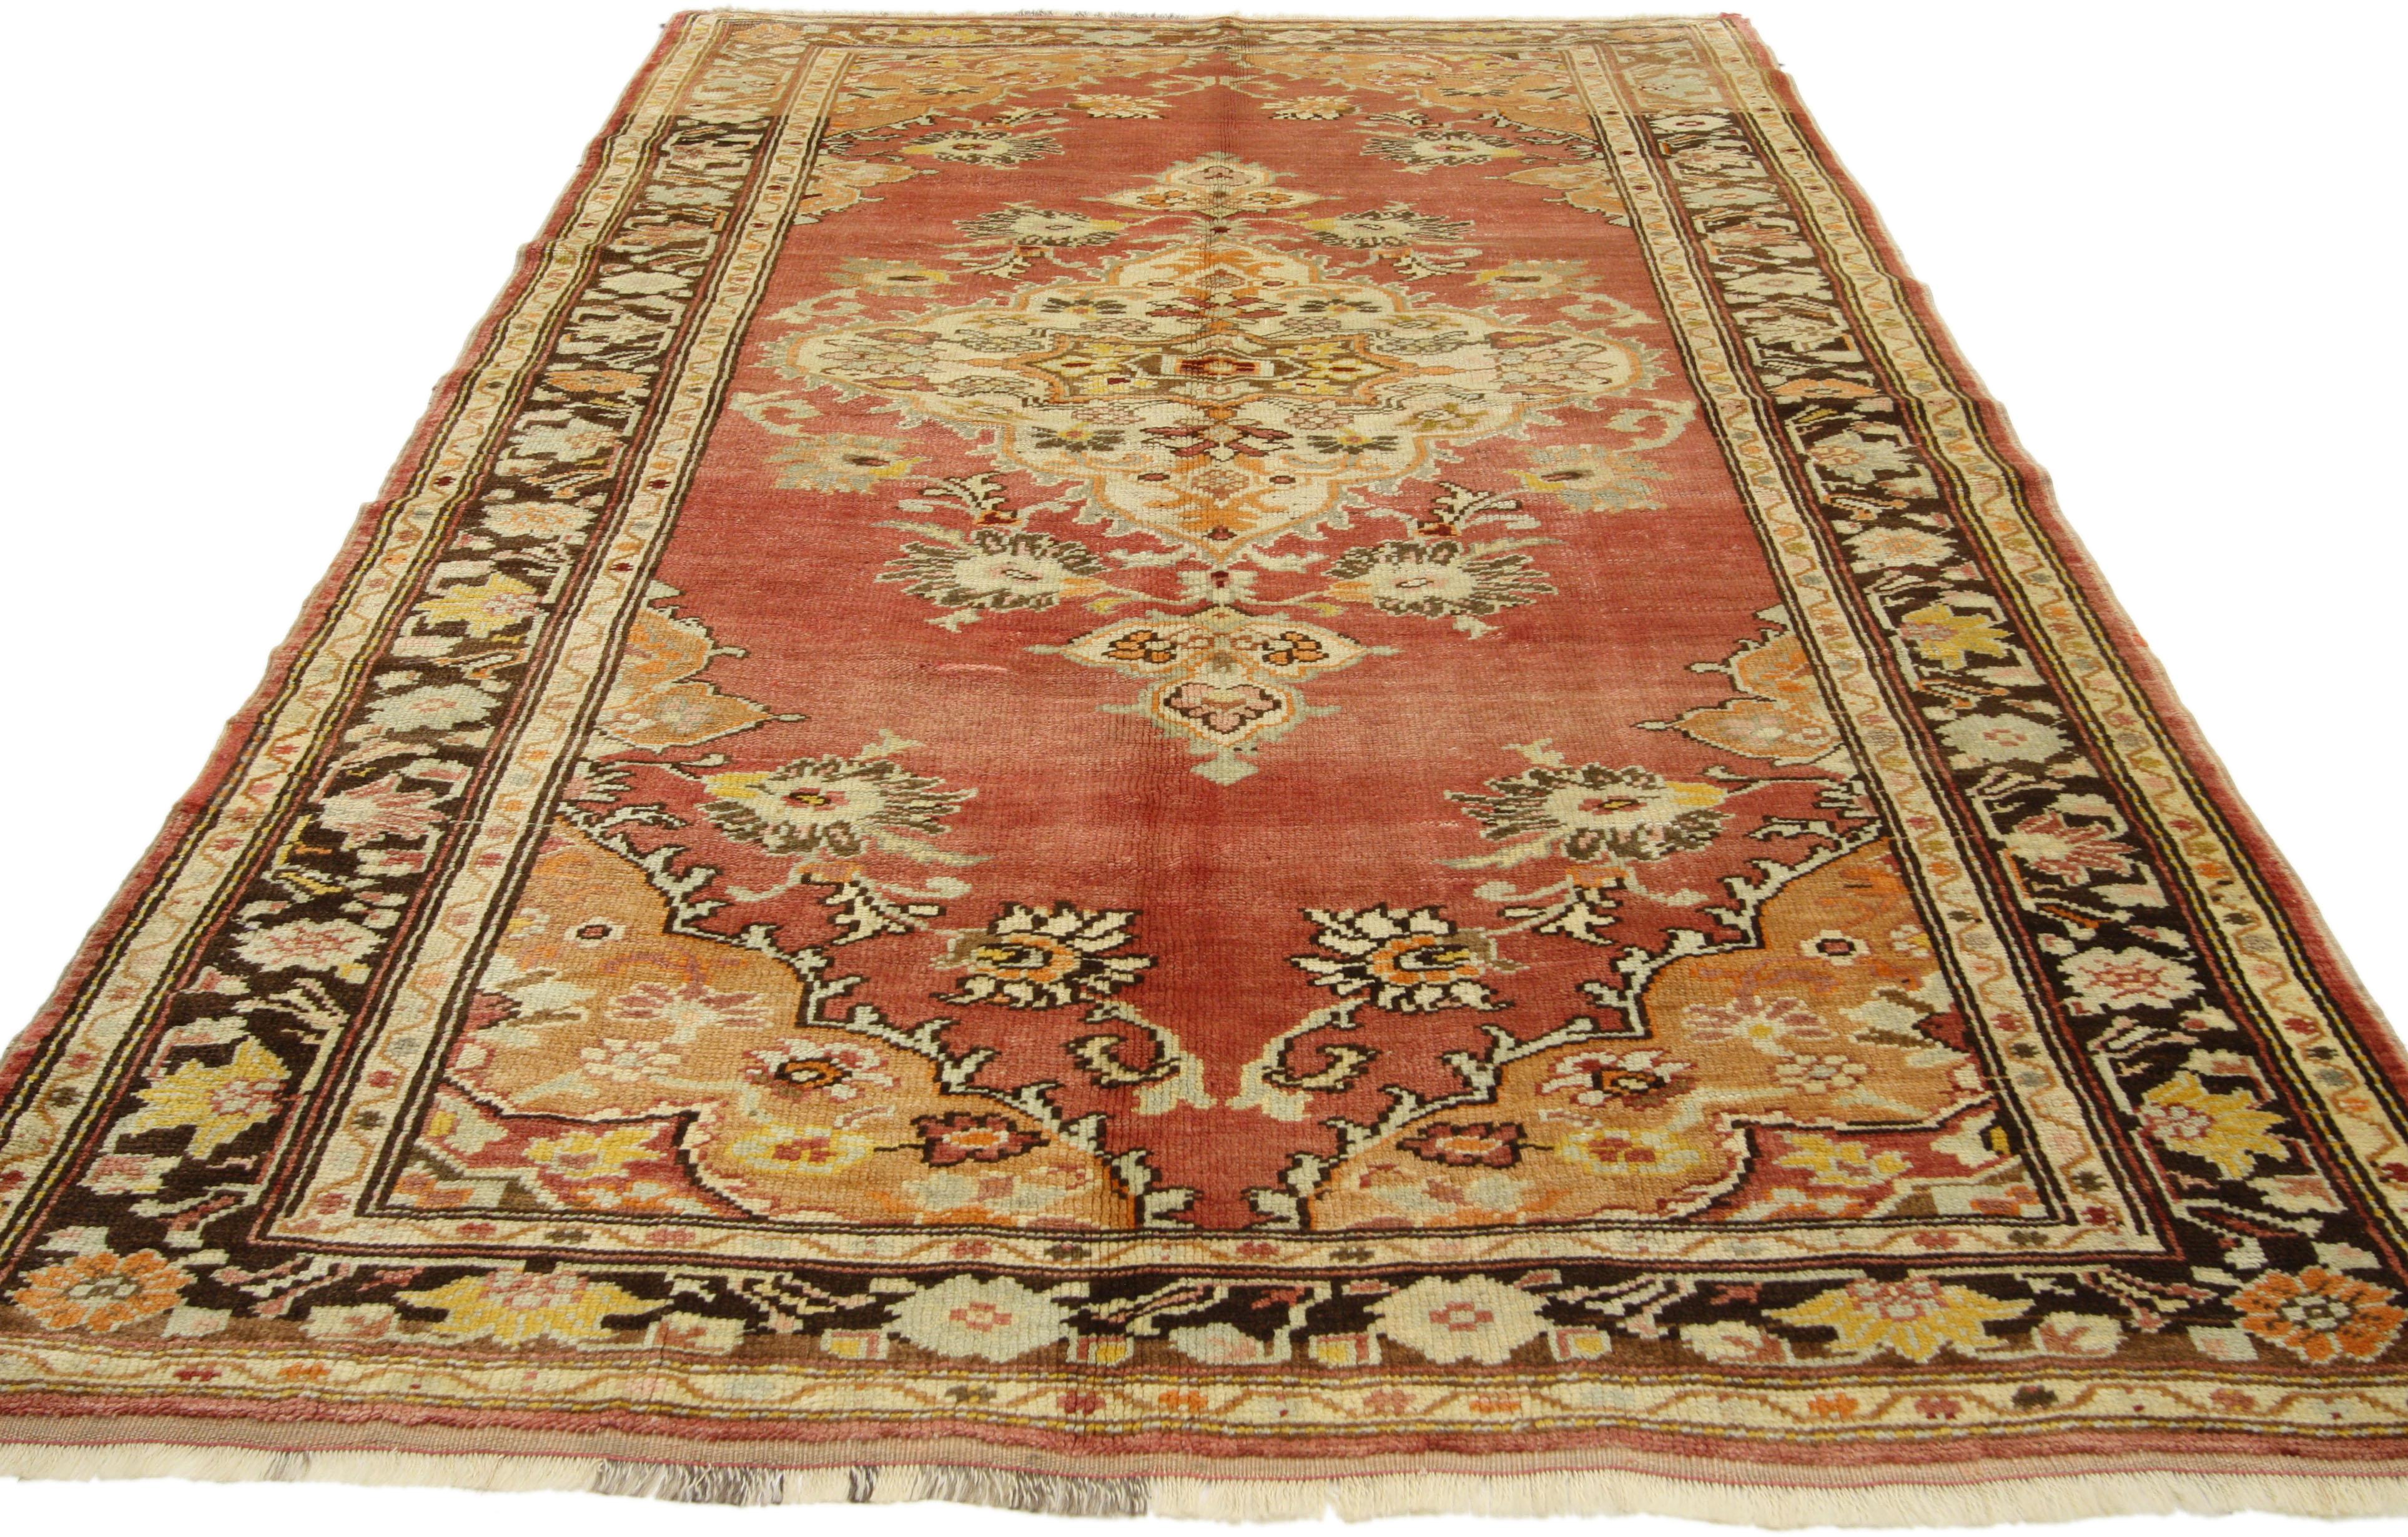 73640, vintage Turkish Oushak Accent rug with traditional style, entry or foyer rug. This hand-knotted wool vintage Turkish Oushak accent rug with traditional style features a center lozenge medallion on an abrashed field with elaborate surrounding